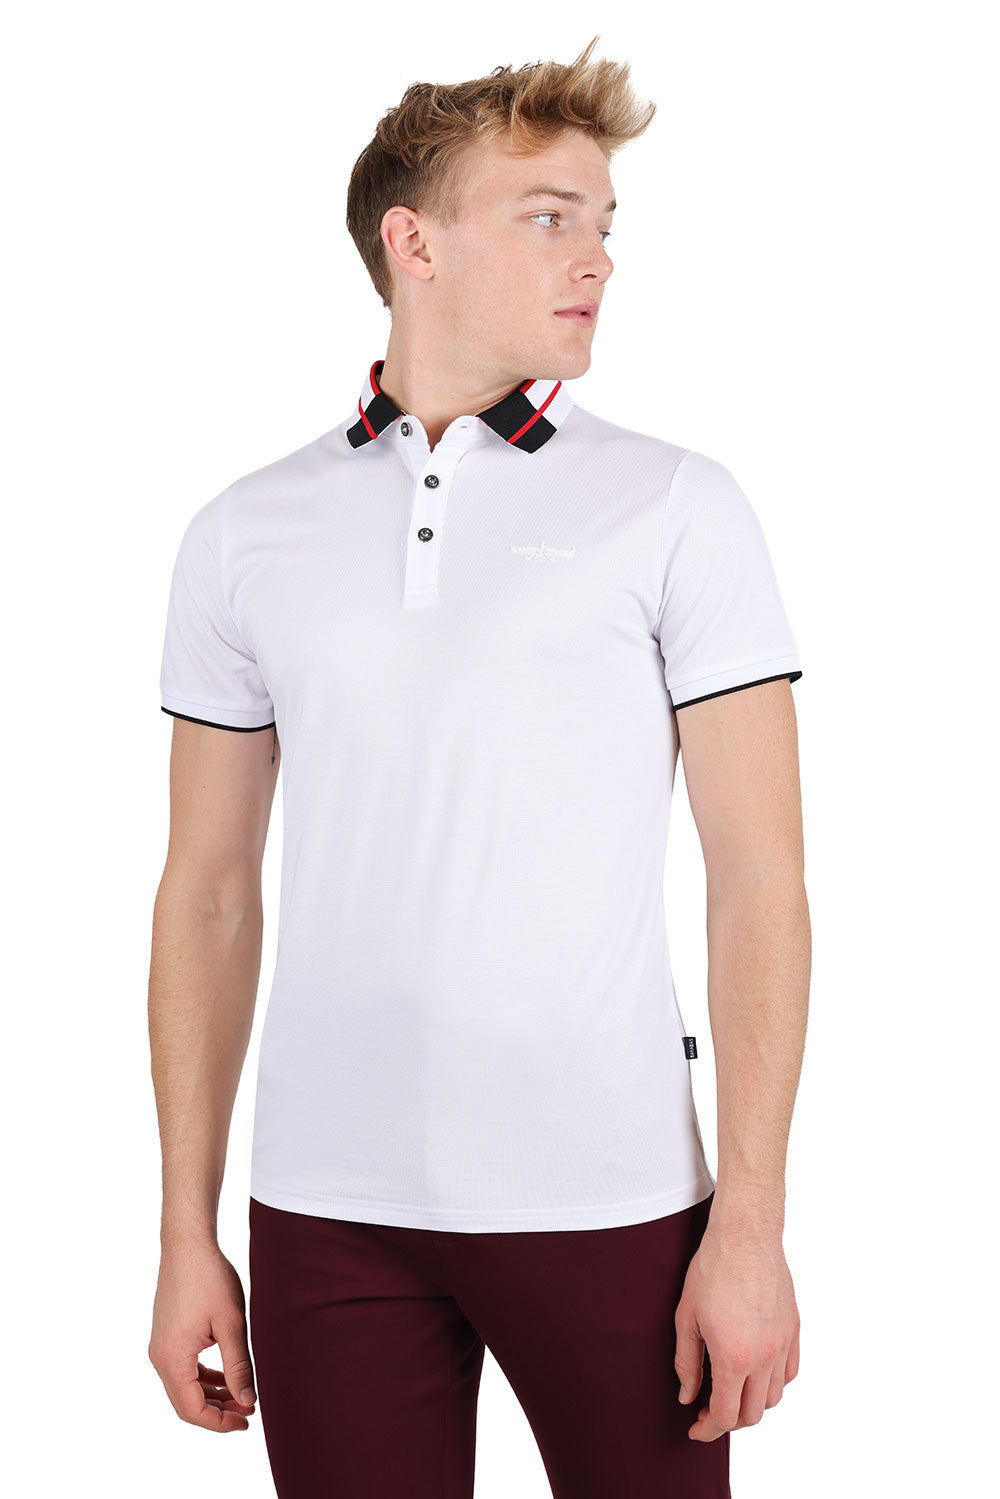 Barabas Men's Solid Color Luxury Short Sleeves Polo Shirts 2PP826 White